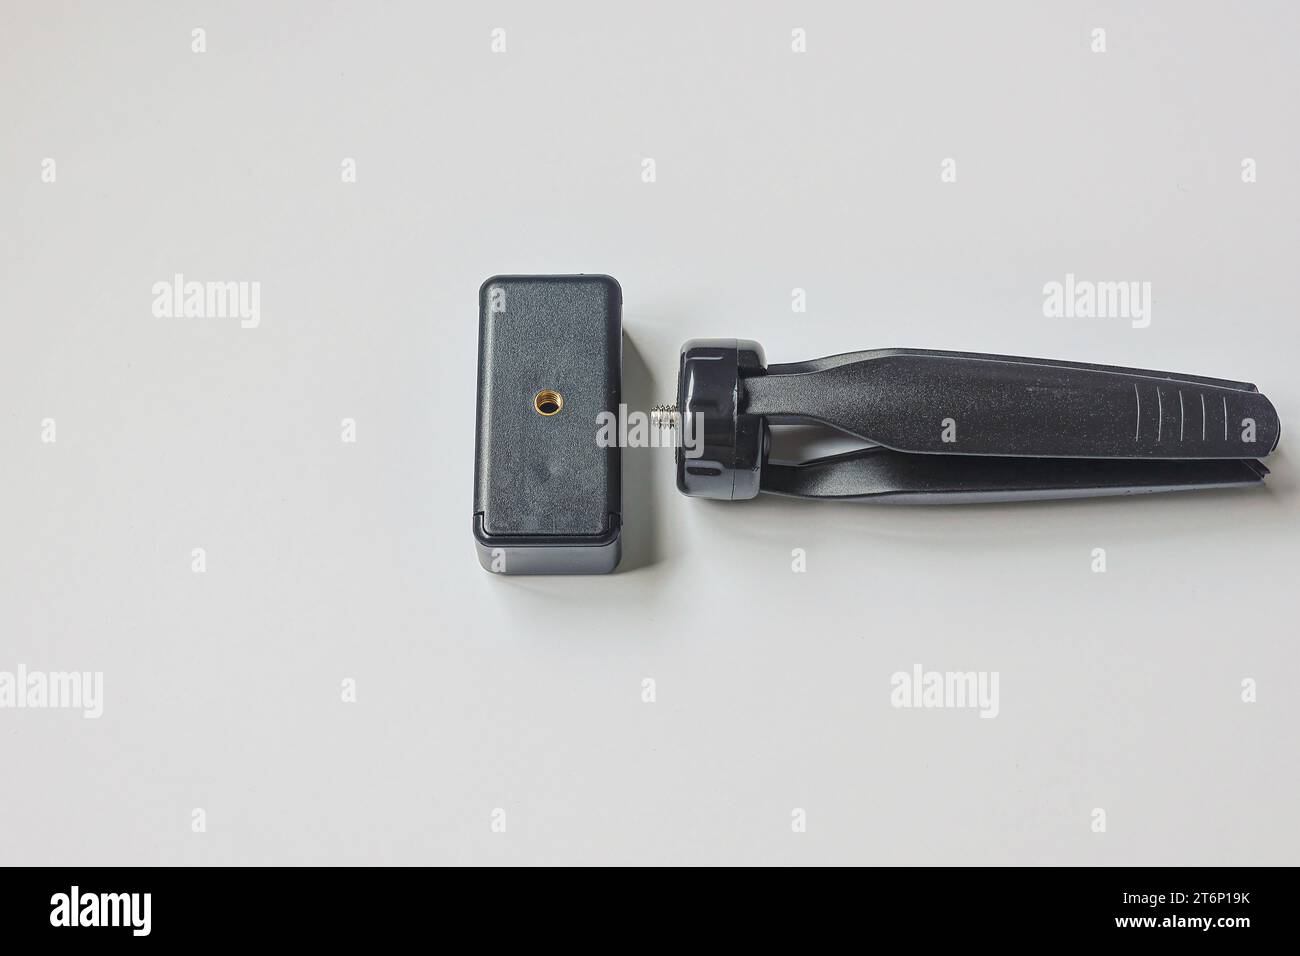 Mini tripod with cell phone holder technology concept Stock Photo